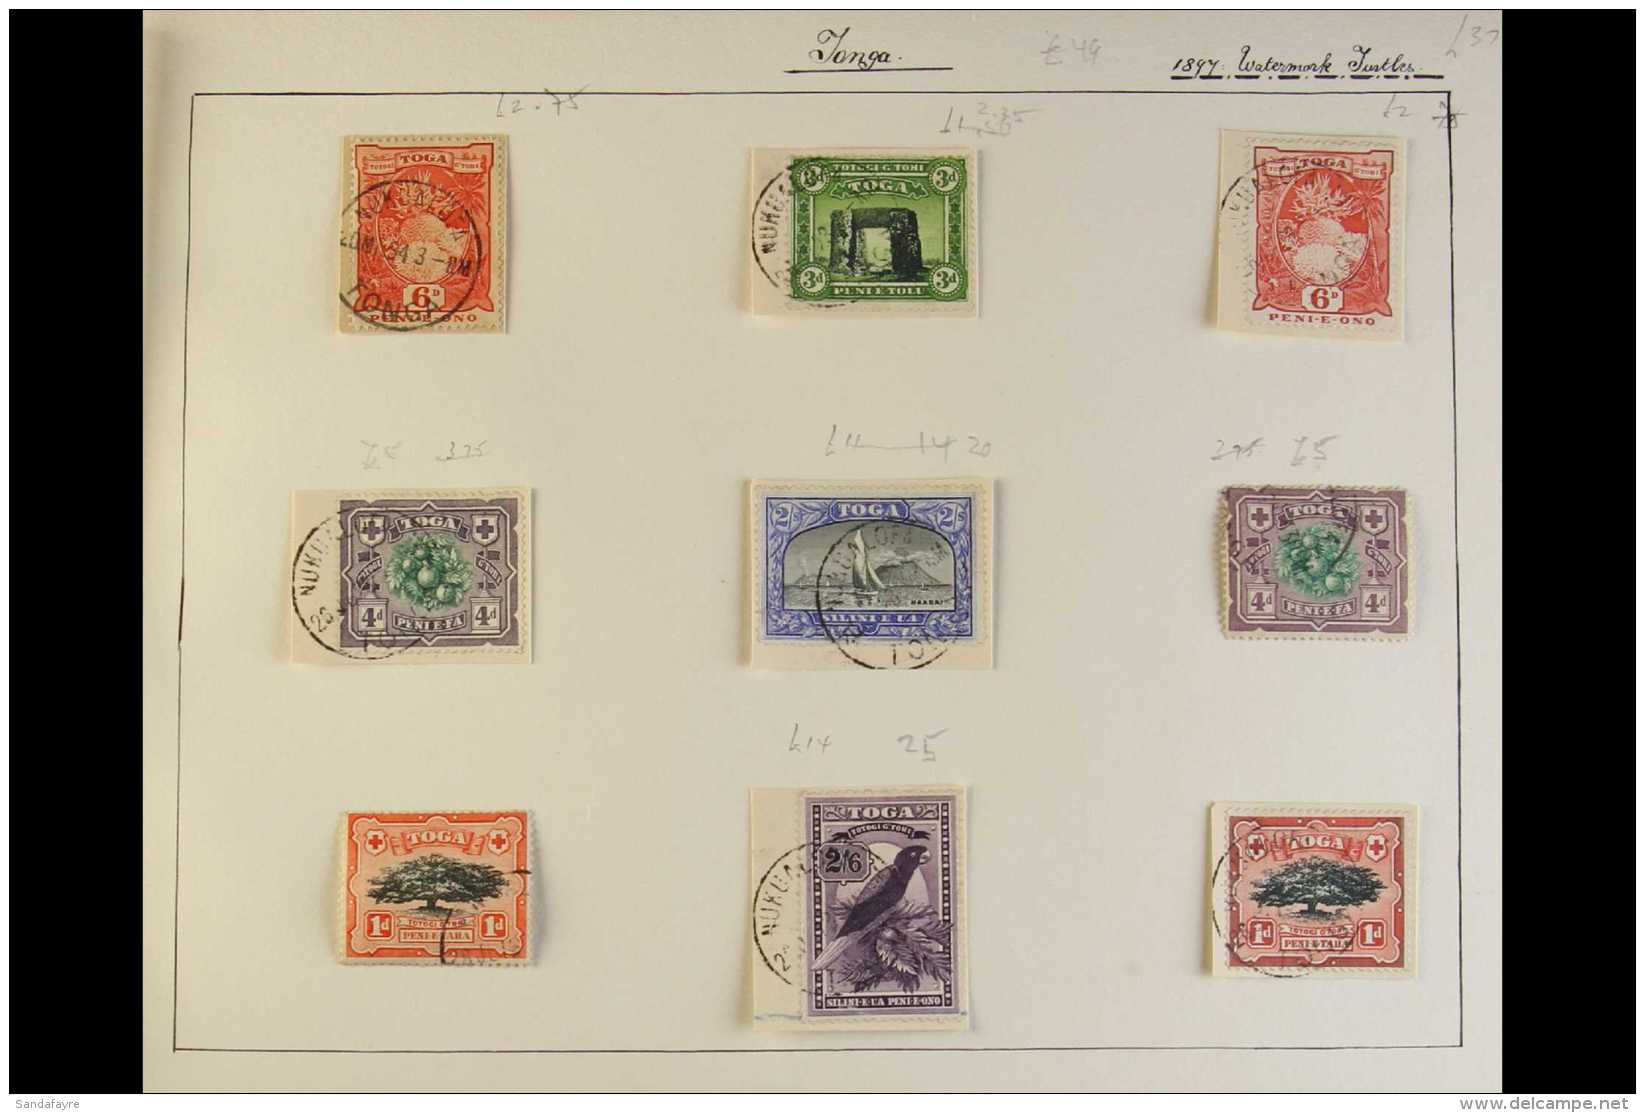 1897-1935 POSTMARKS COLLECTION  An Attractive Selection Of Issues, Many "on Piece" Items Inc 1897 Pictorials To... - Tonga (...-1970)